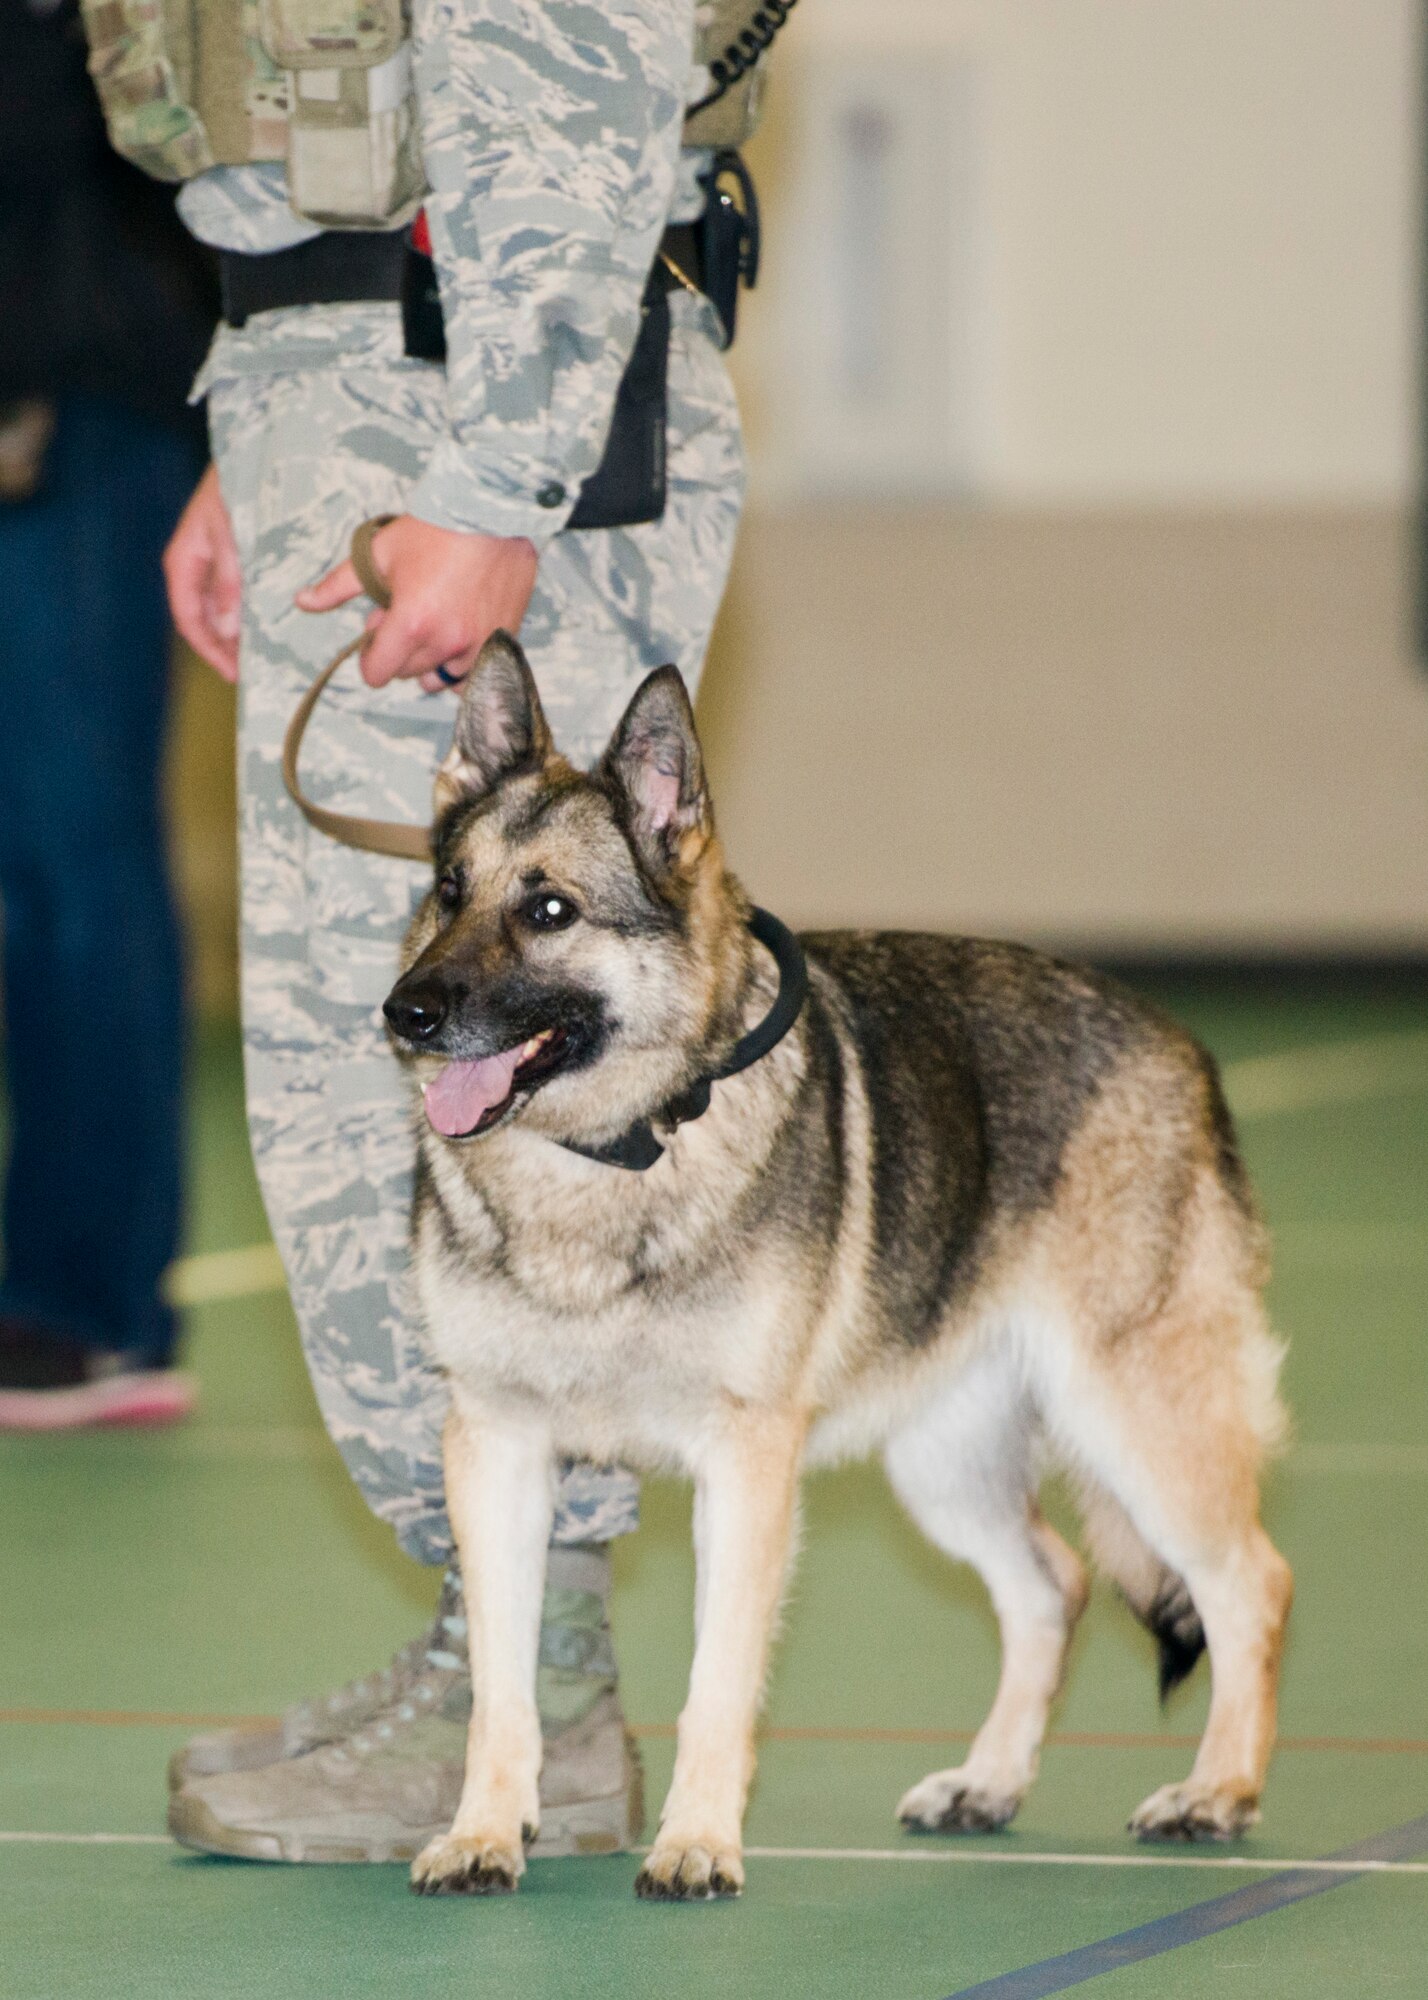 Military working dog Cyndy stands next to Senior Airman Dakota Willis, 5th Security Forces Squadron military working dog handler, at the Youth Center at Minot Air Force Base, N.D., July 7, 2016. Handlers held a question and answer session after the practical demonstration. (U.S. Air Force photo/Airman 1st Class J.T. Armstrong)